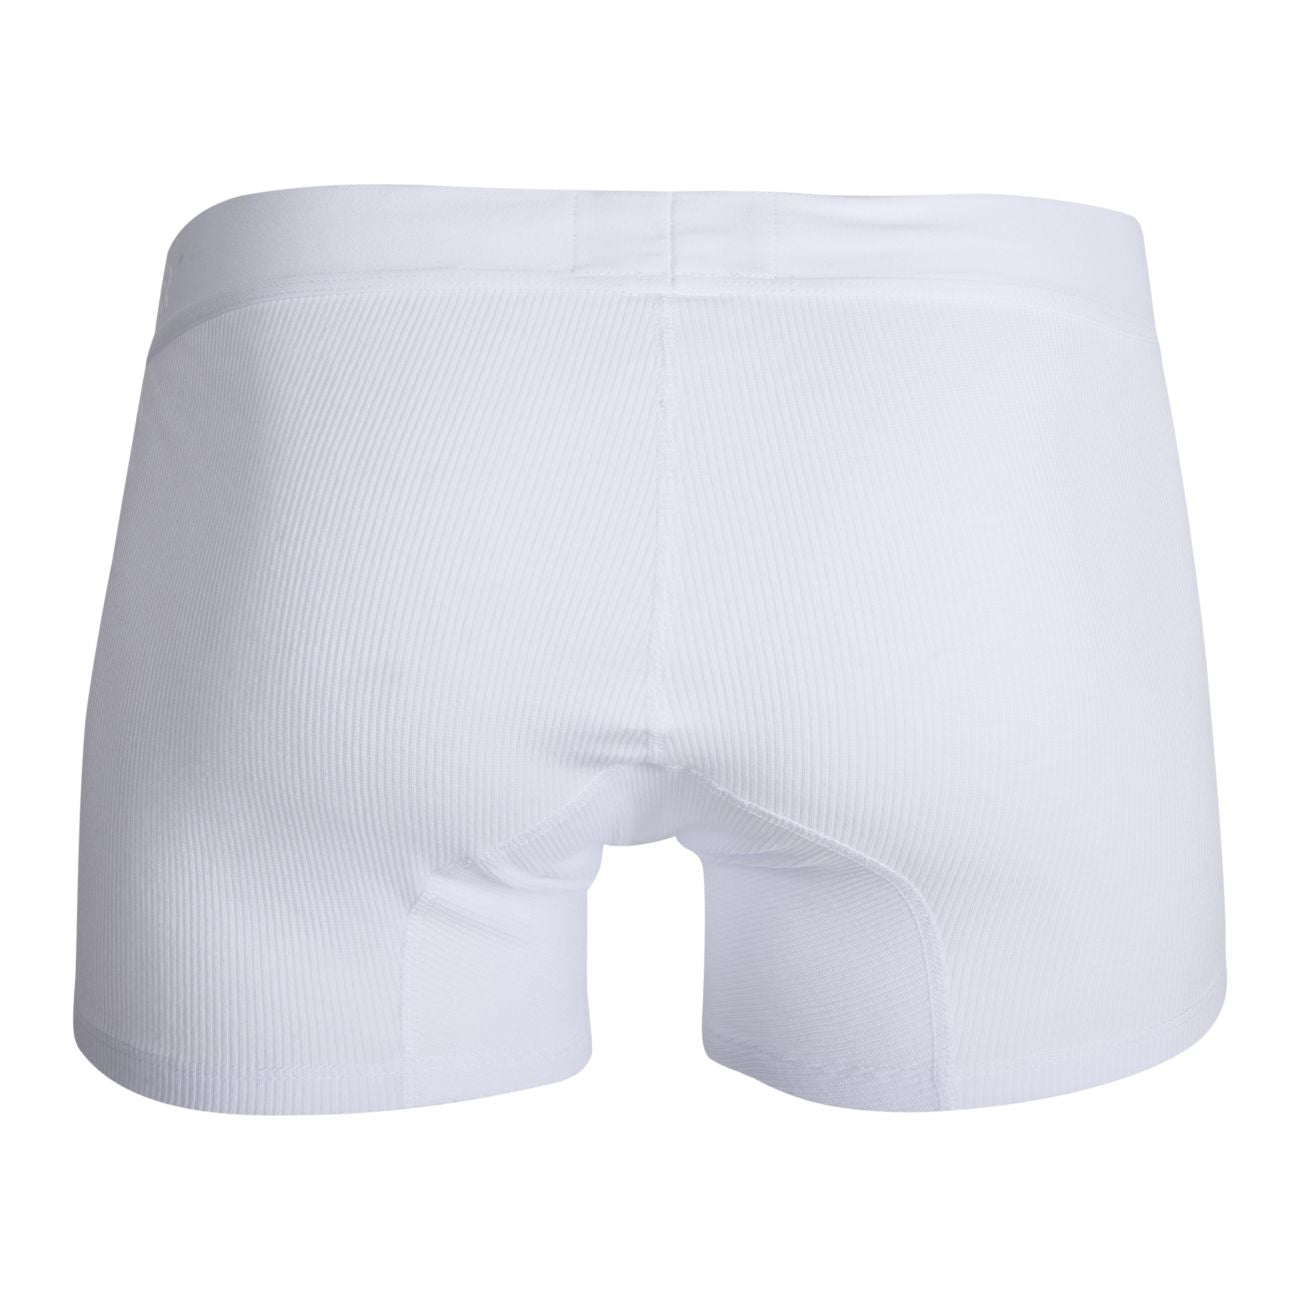 Clever 1471 Heavenly Trunks White